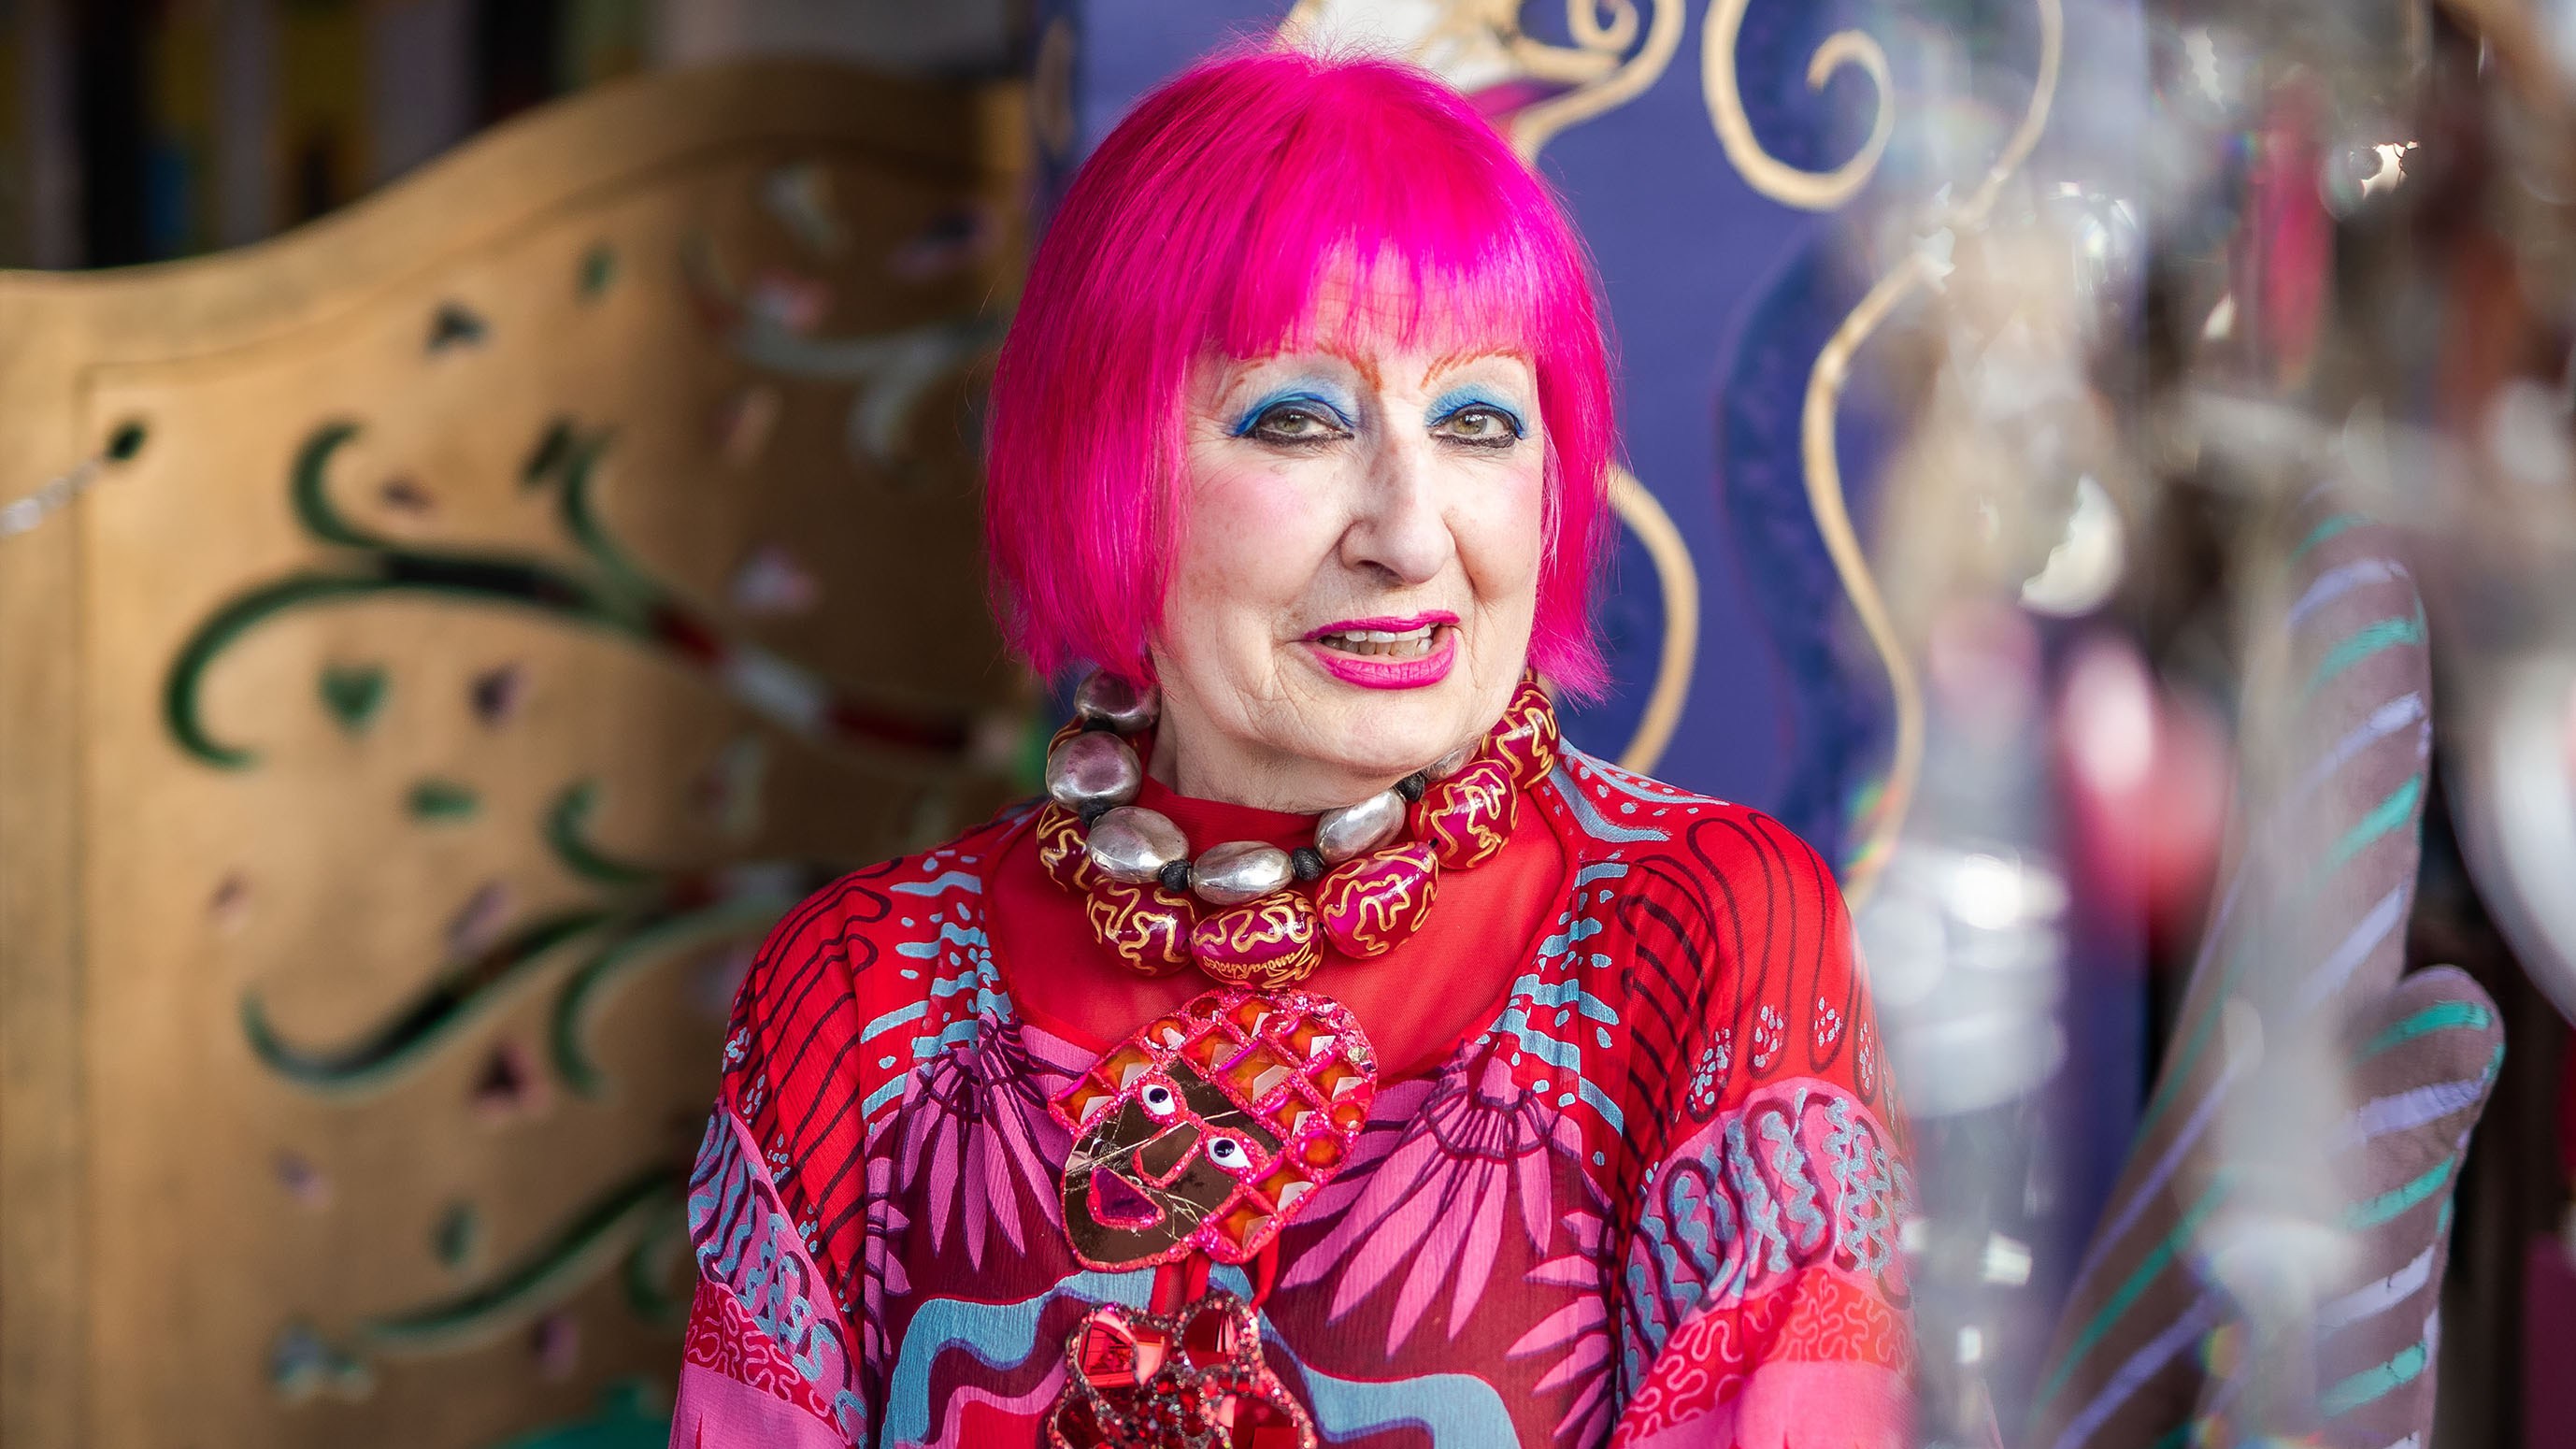 Zandra Rhodes in her home studio in London. “My hair is pink; I’m not accepting that it’s grey. I dye it every month”